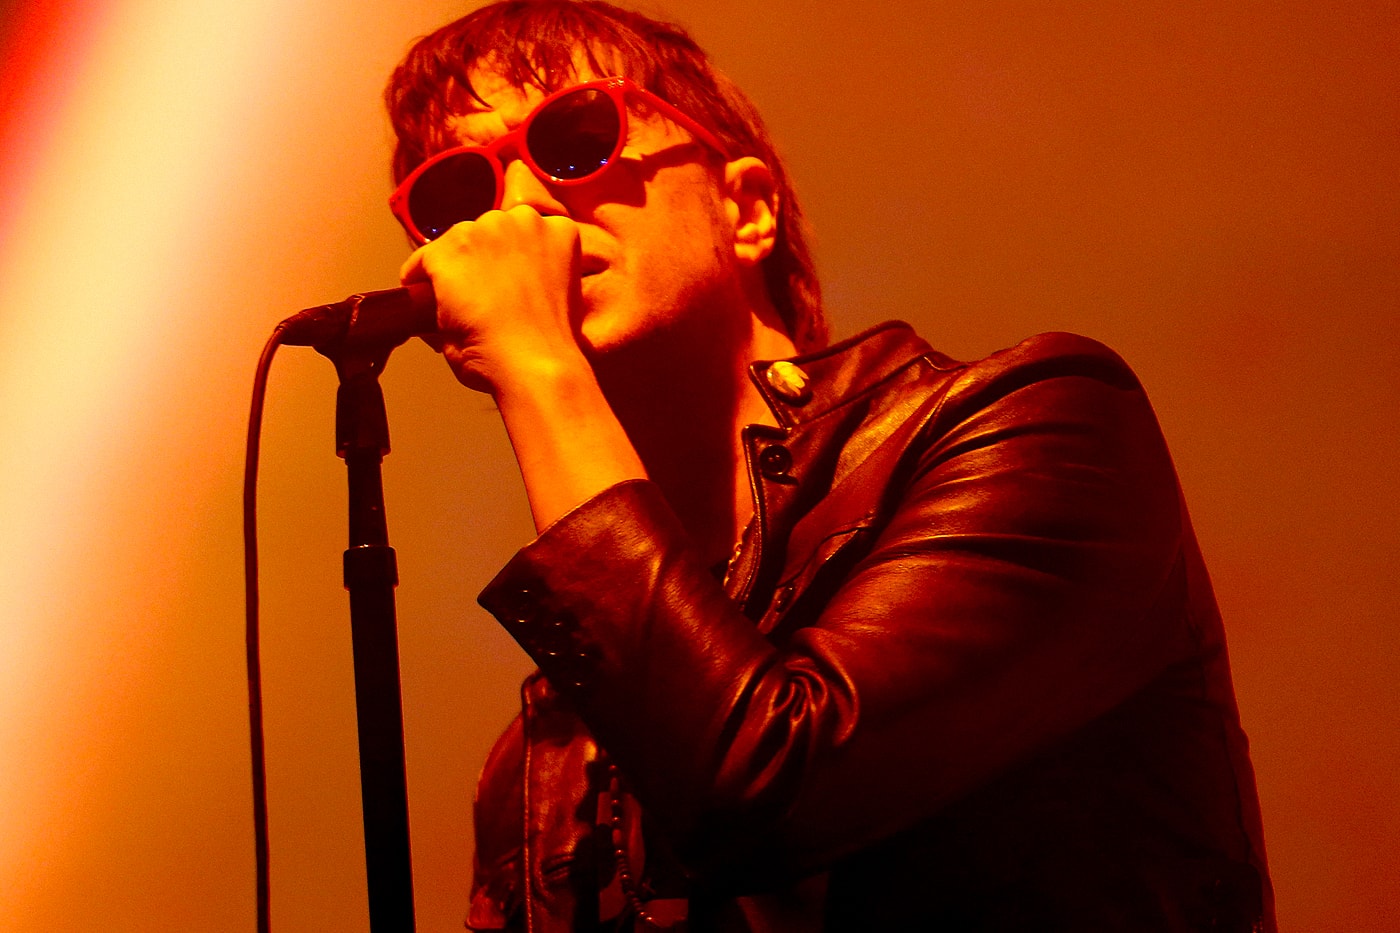 Julian Casablancas Sells Portion of Shares in The Strokes Catalog primary wave music